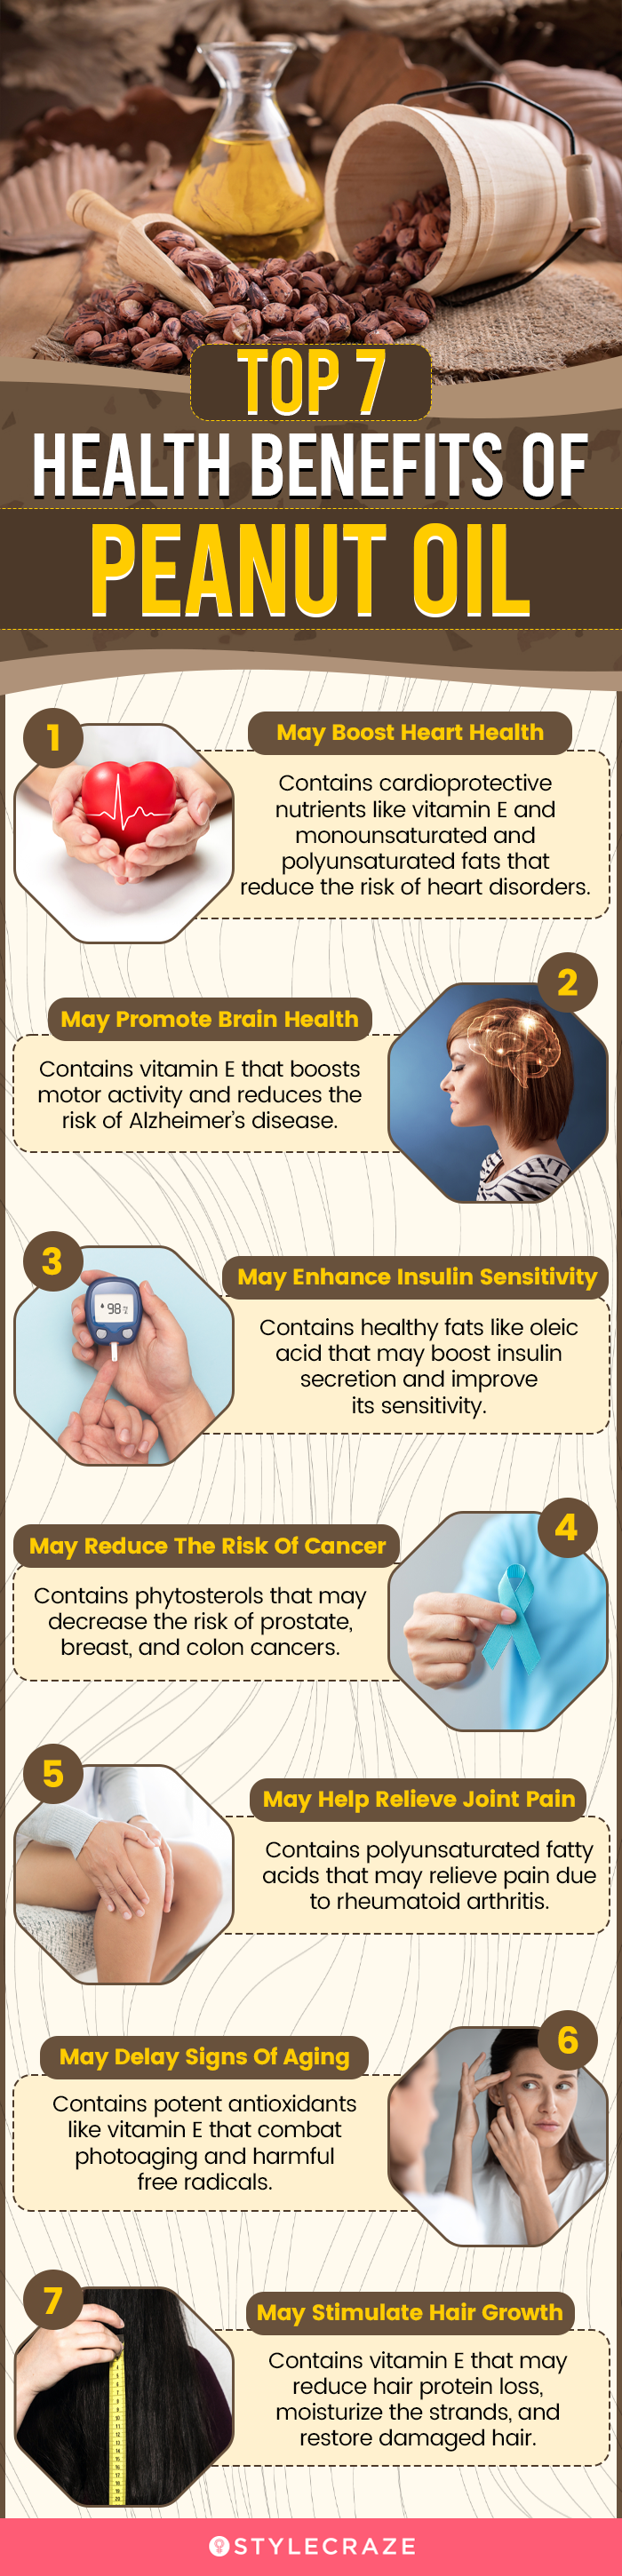 top 7 health benefits of peanut oil (infographic)